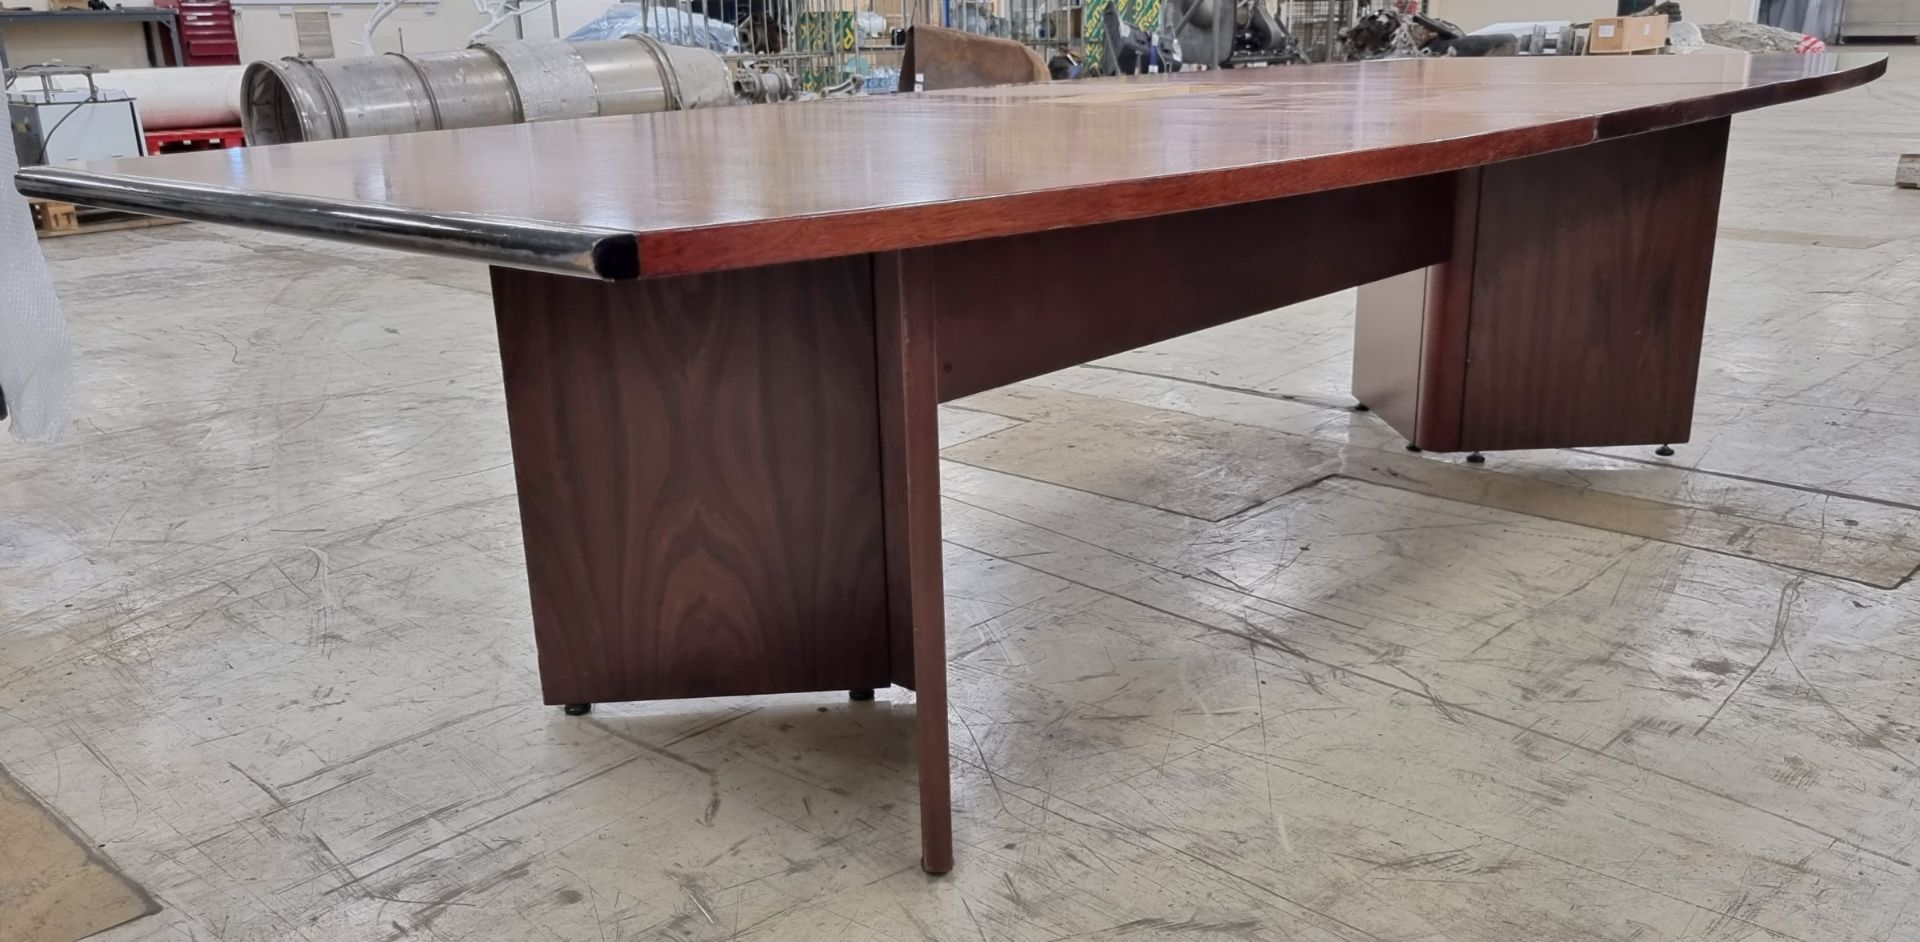 Rosewood 3 part sectional boardroom table on pedestal - L 2900 x W 1300mm - Image 12 of 15